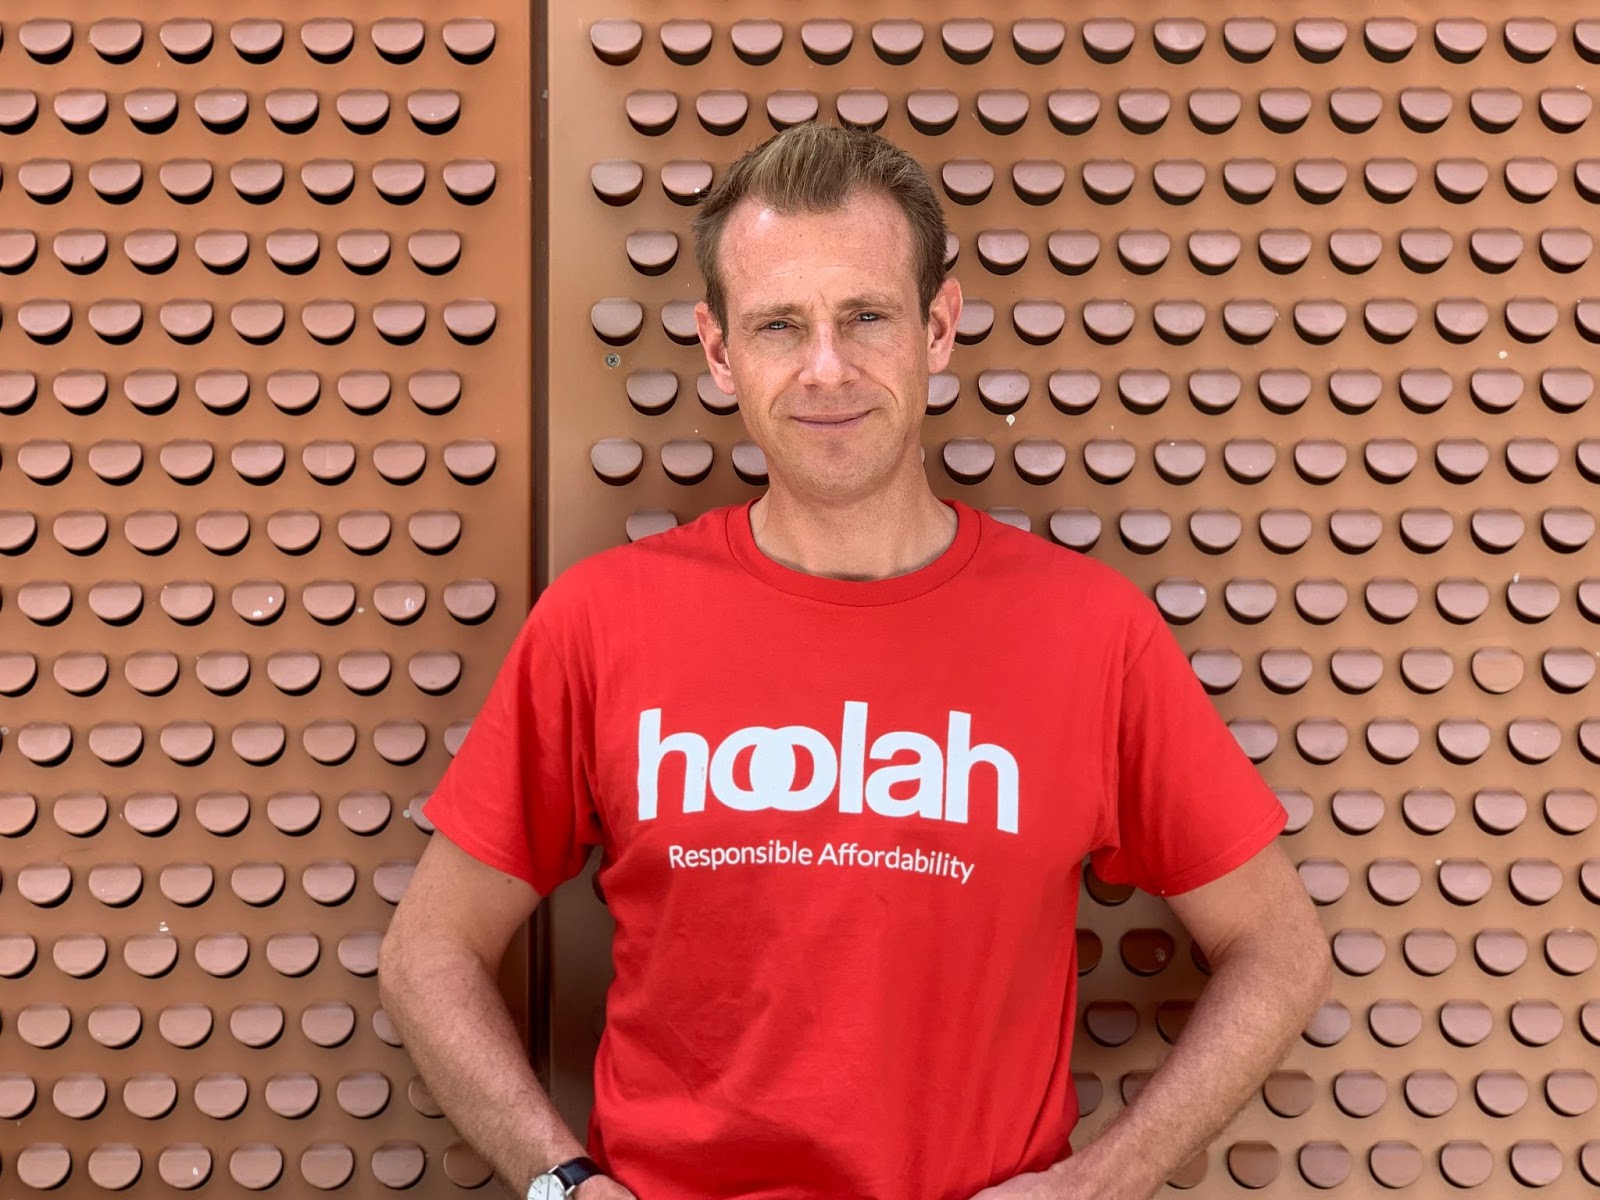 Stuart Thornton, CEO of hoolah, on cultivating vulnerability in the workplace and starting life afresh